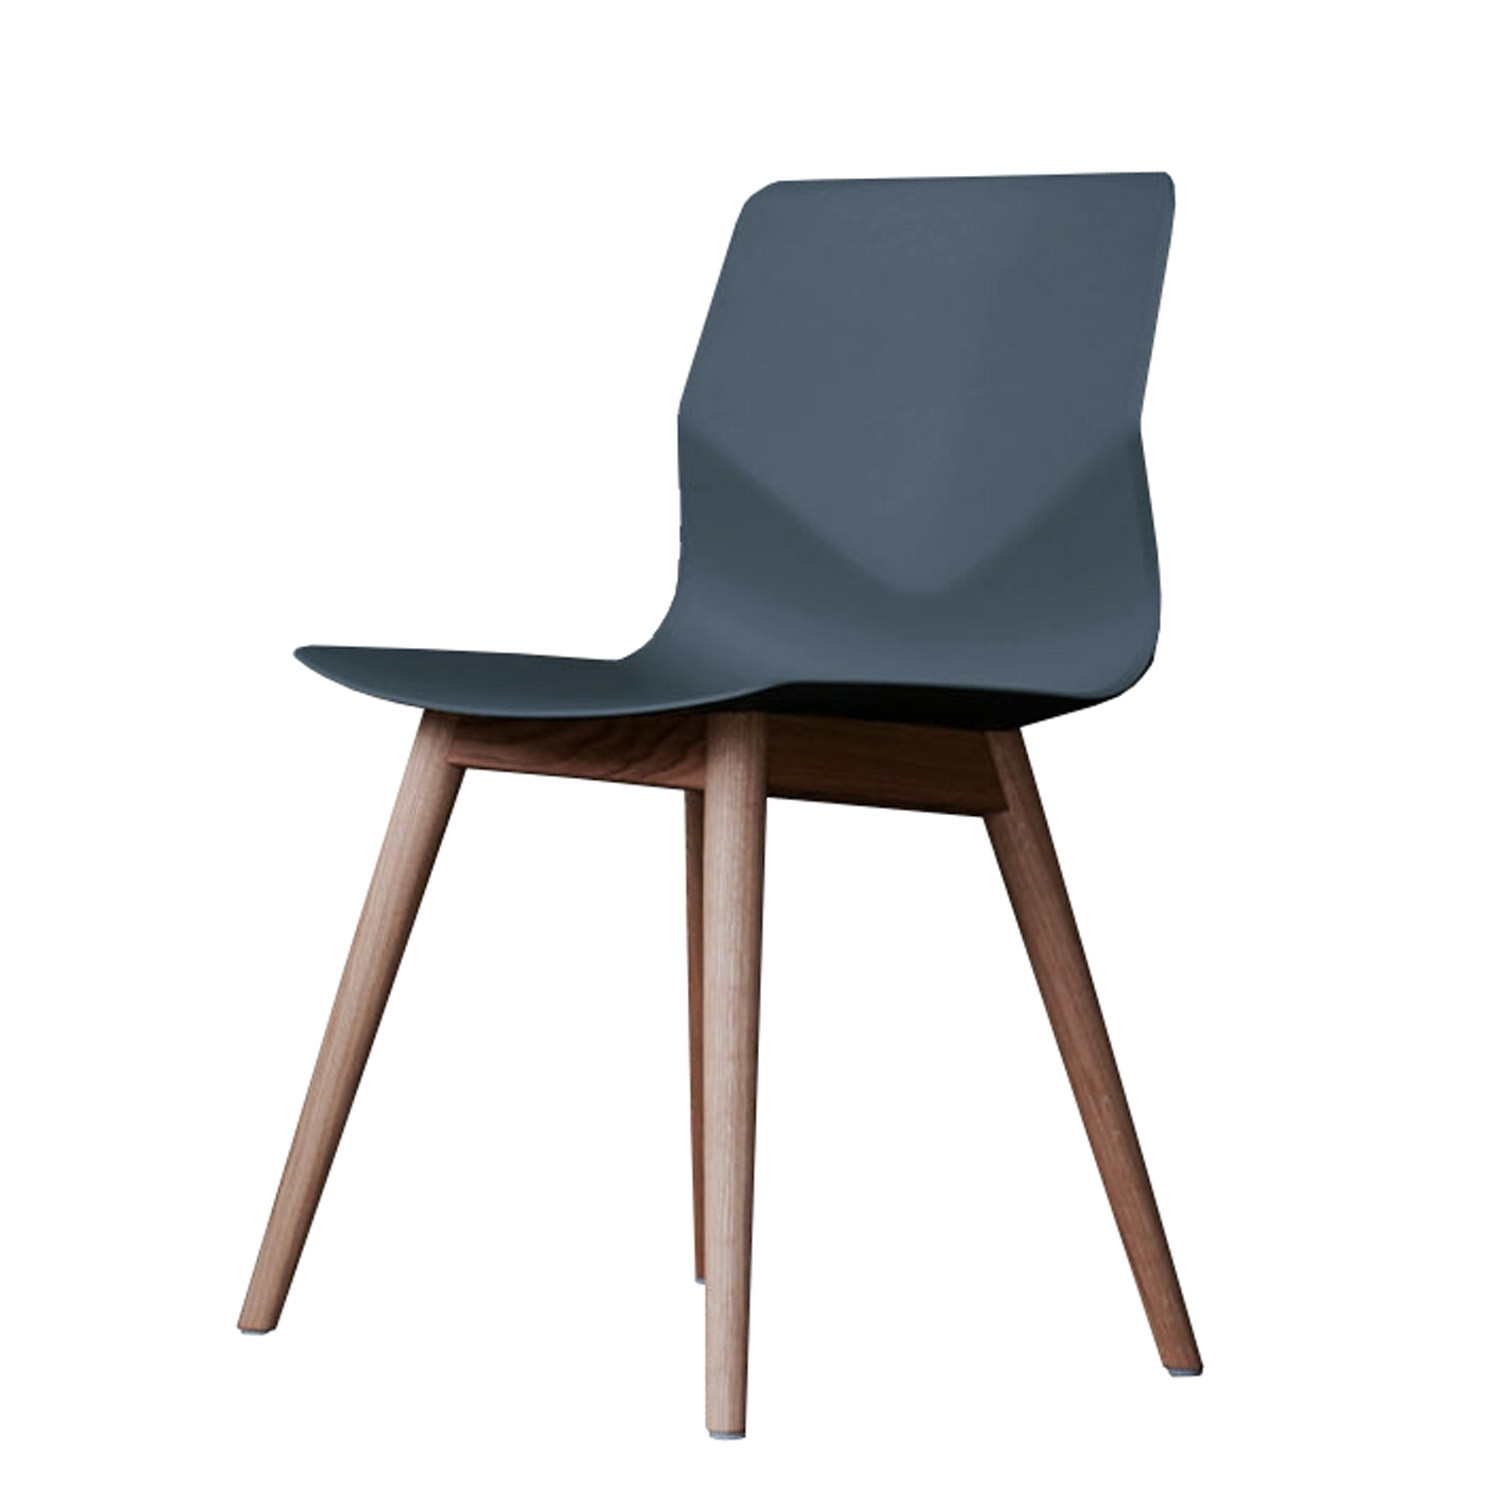 FourSure Wood Chair